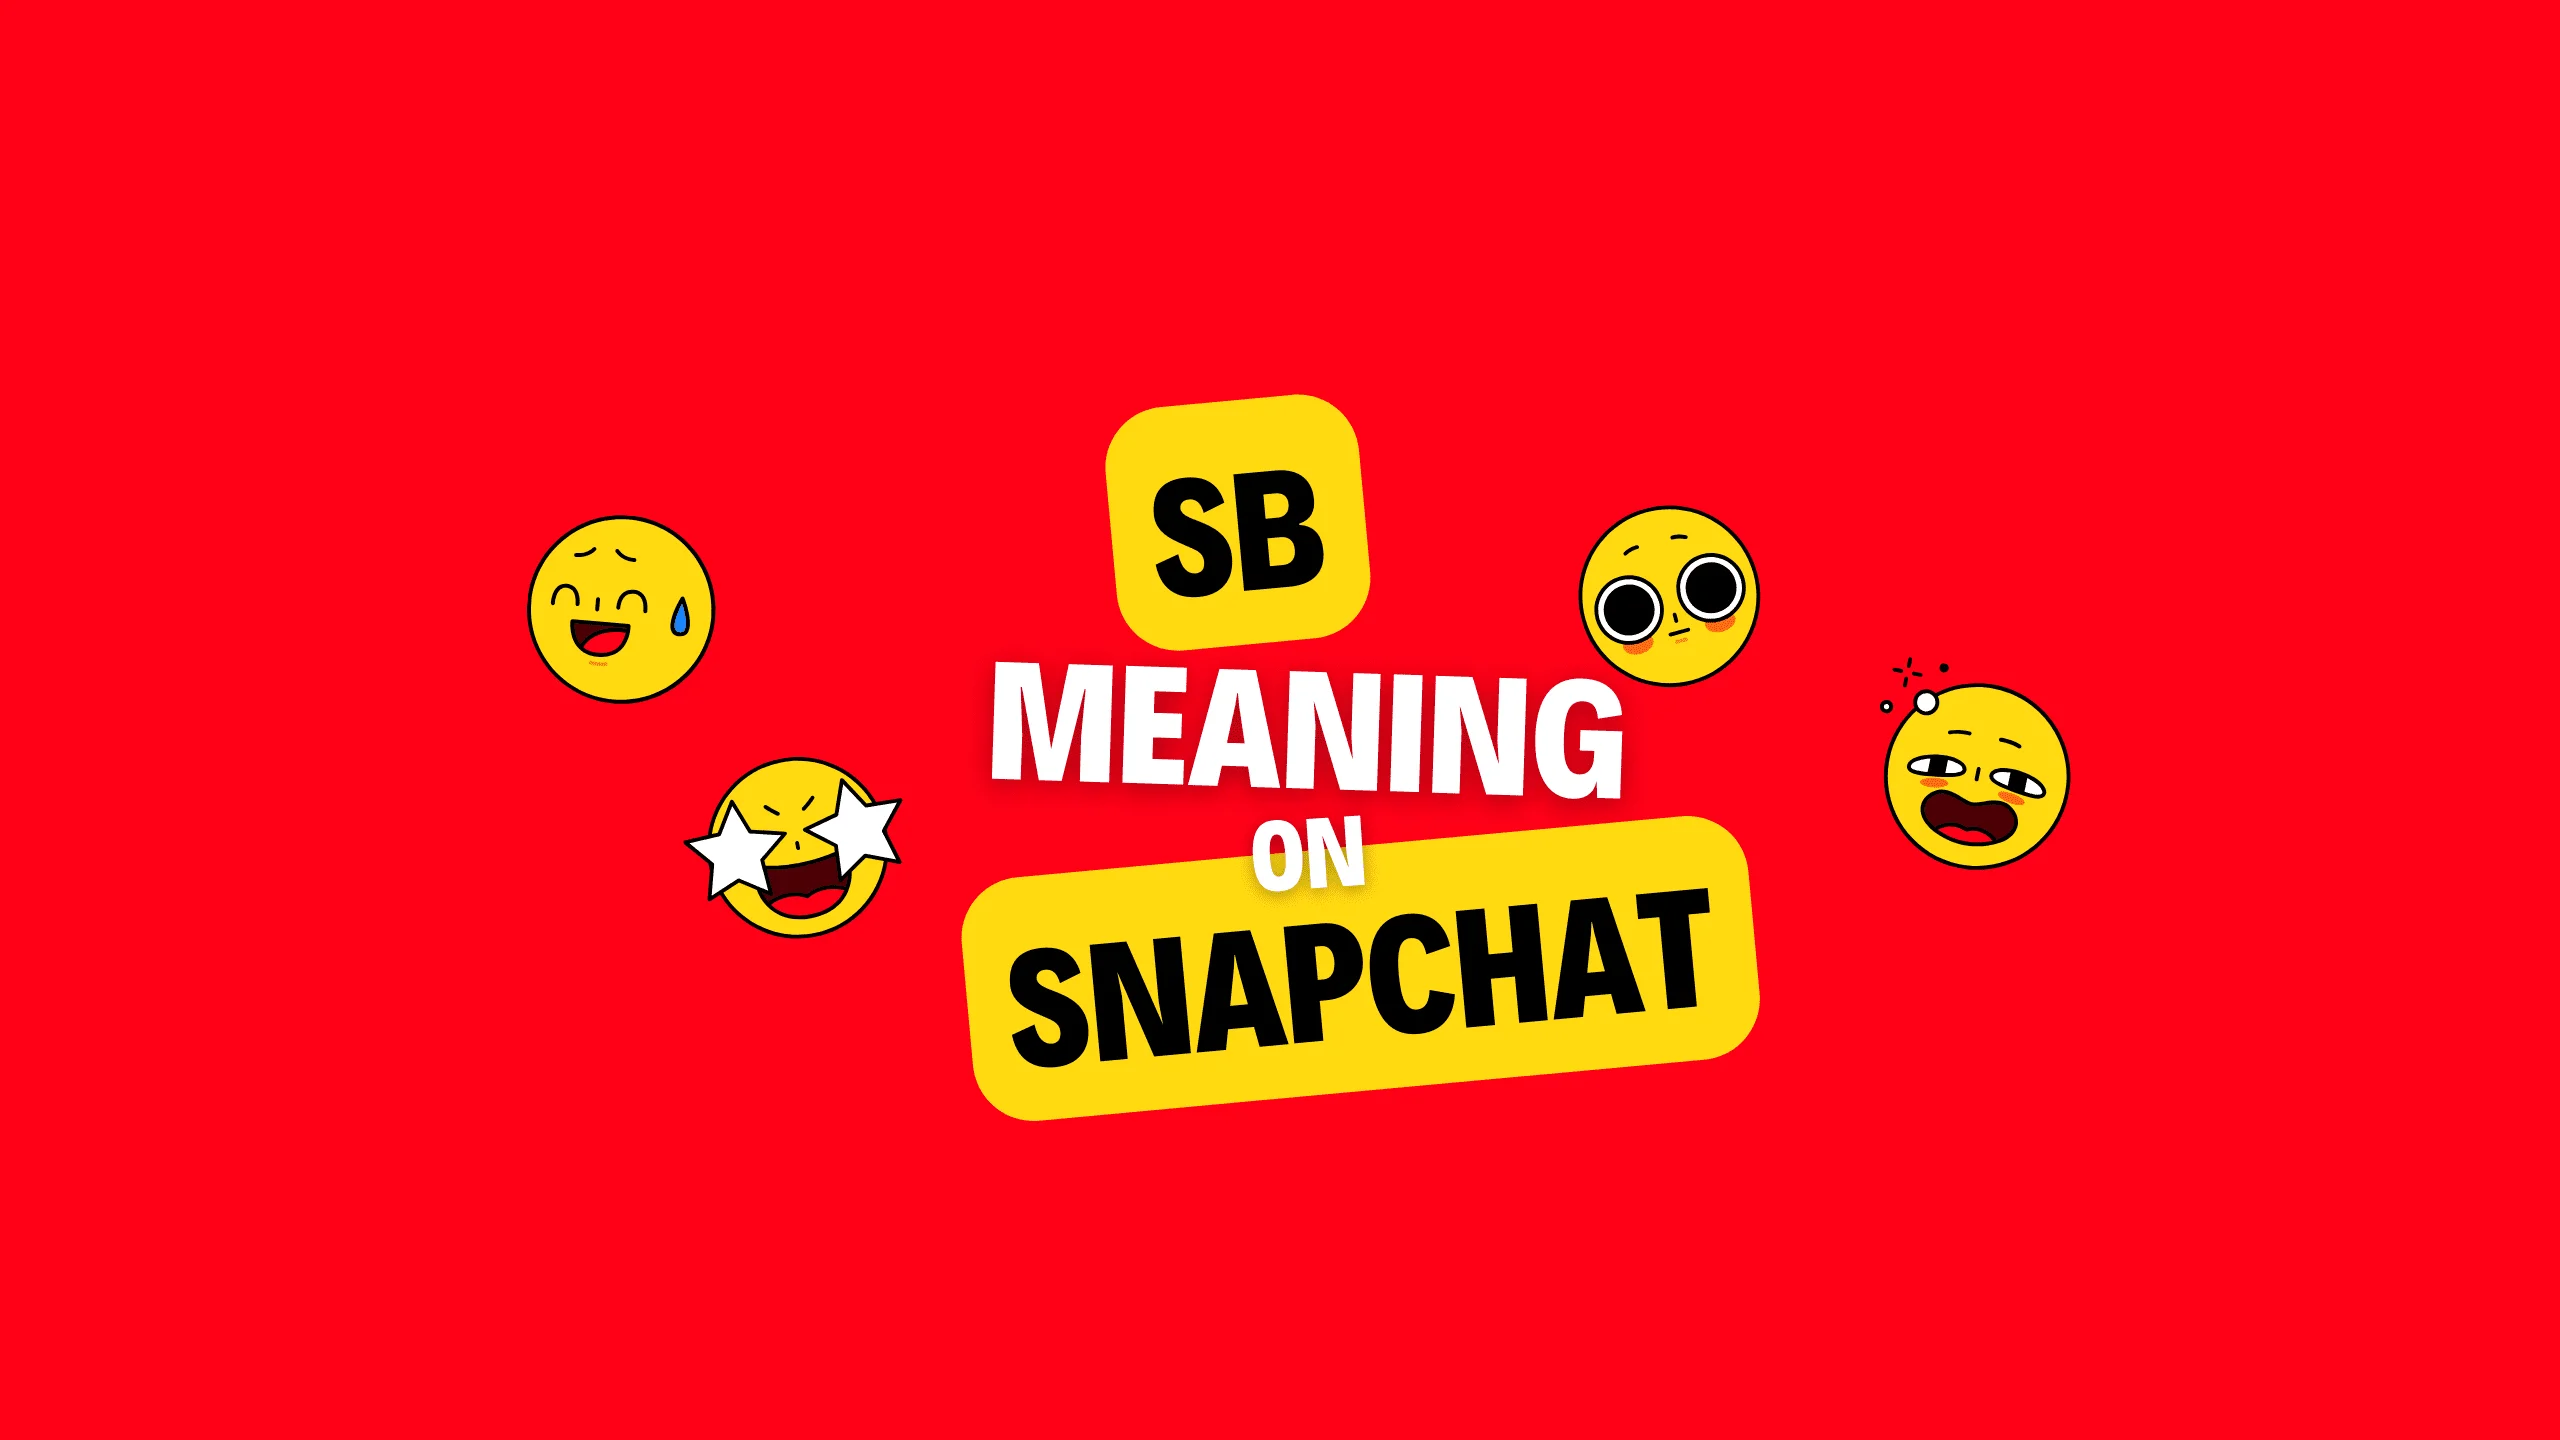 What does SB mean on Snapchat